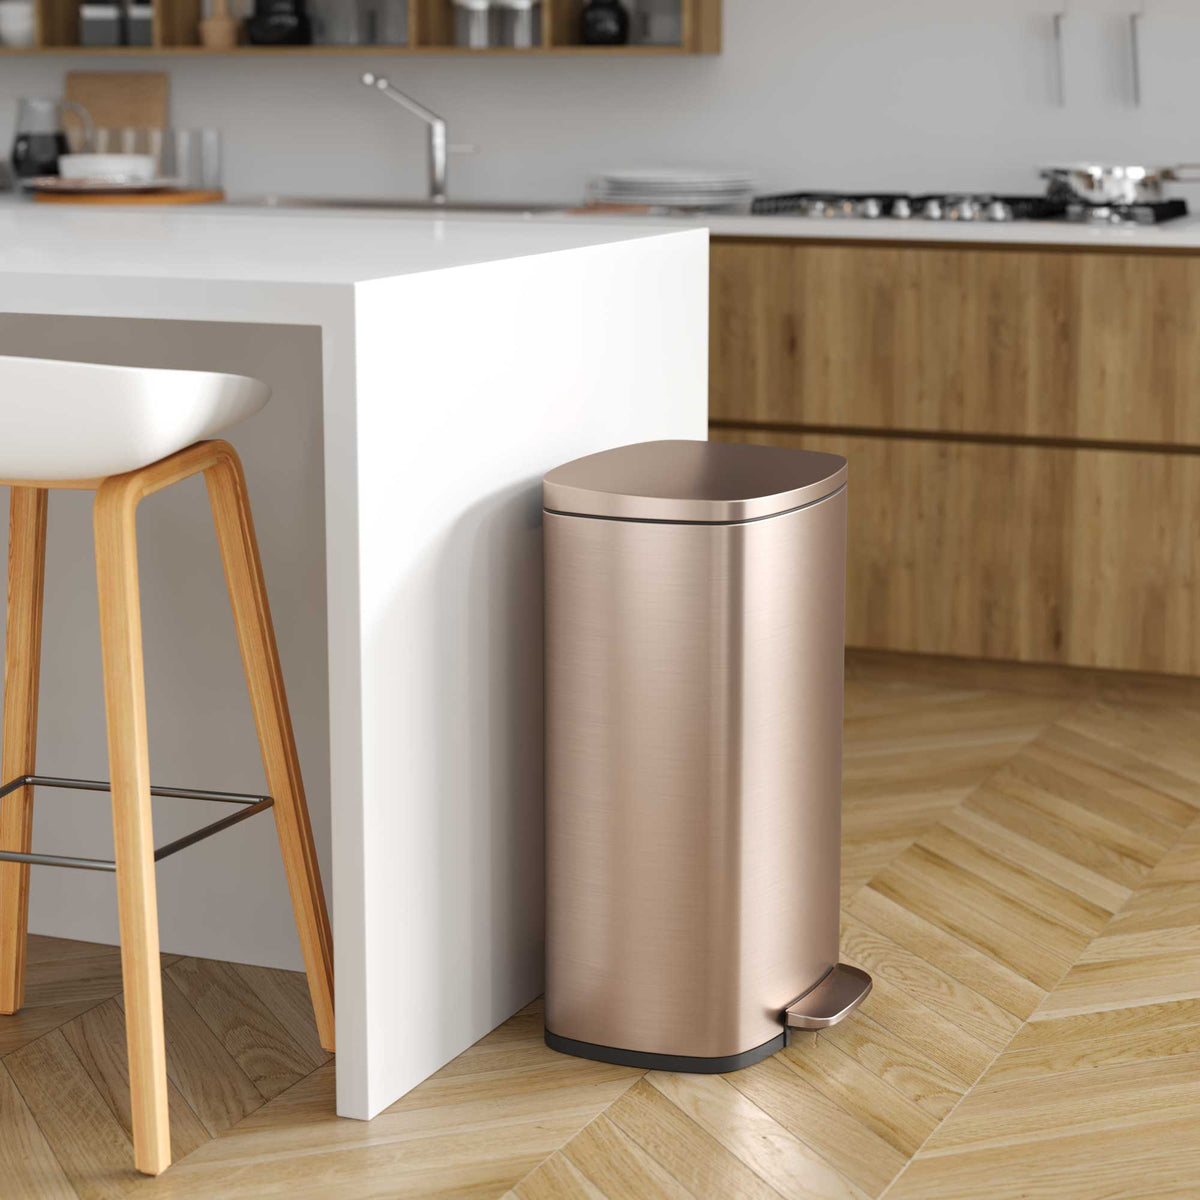 13.2 Gallon / 50 Liter SoftStep Rose Gold Step Pedal Trash Can in kitchen